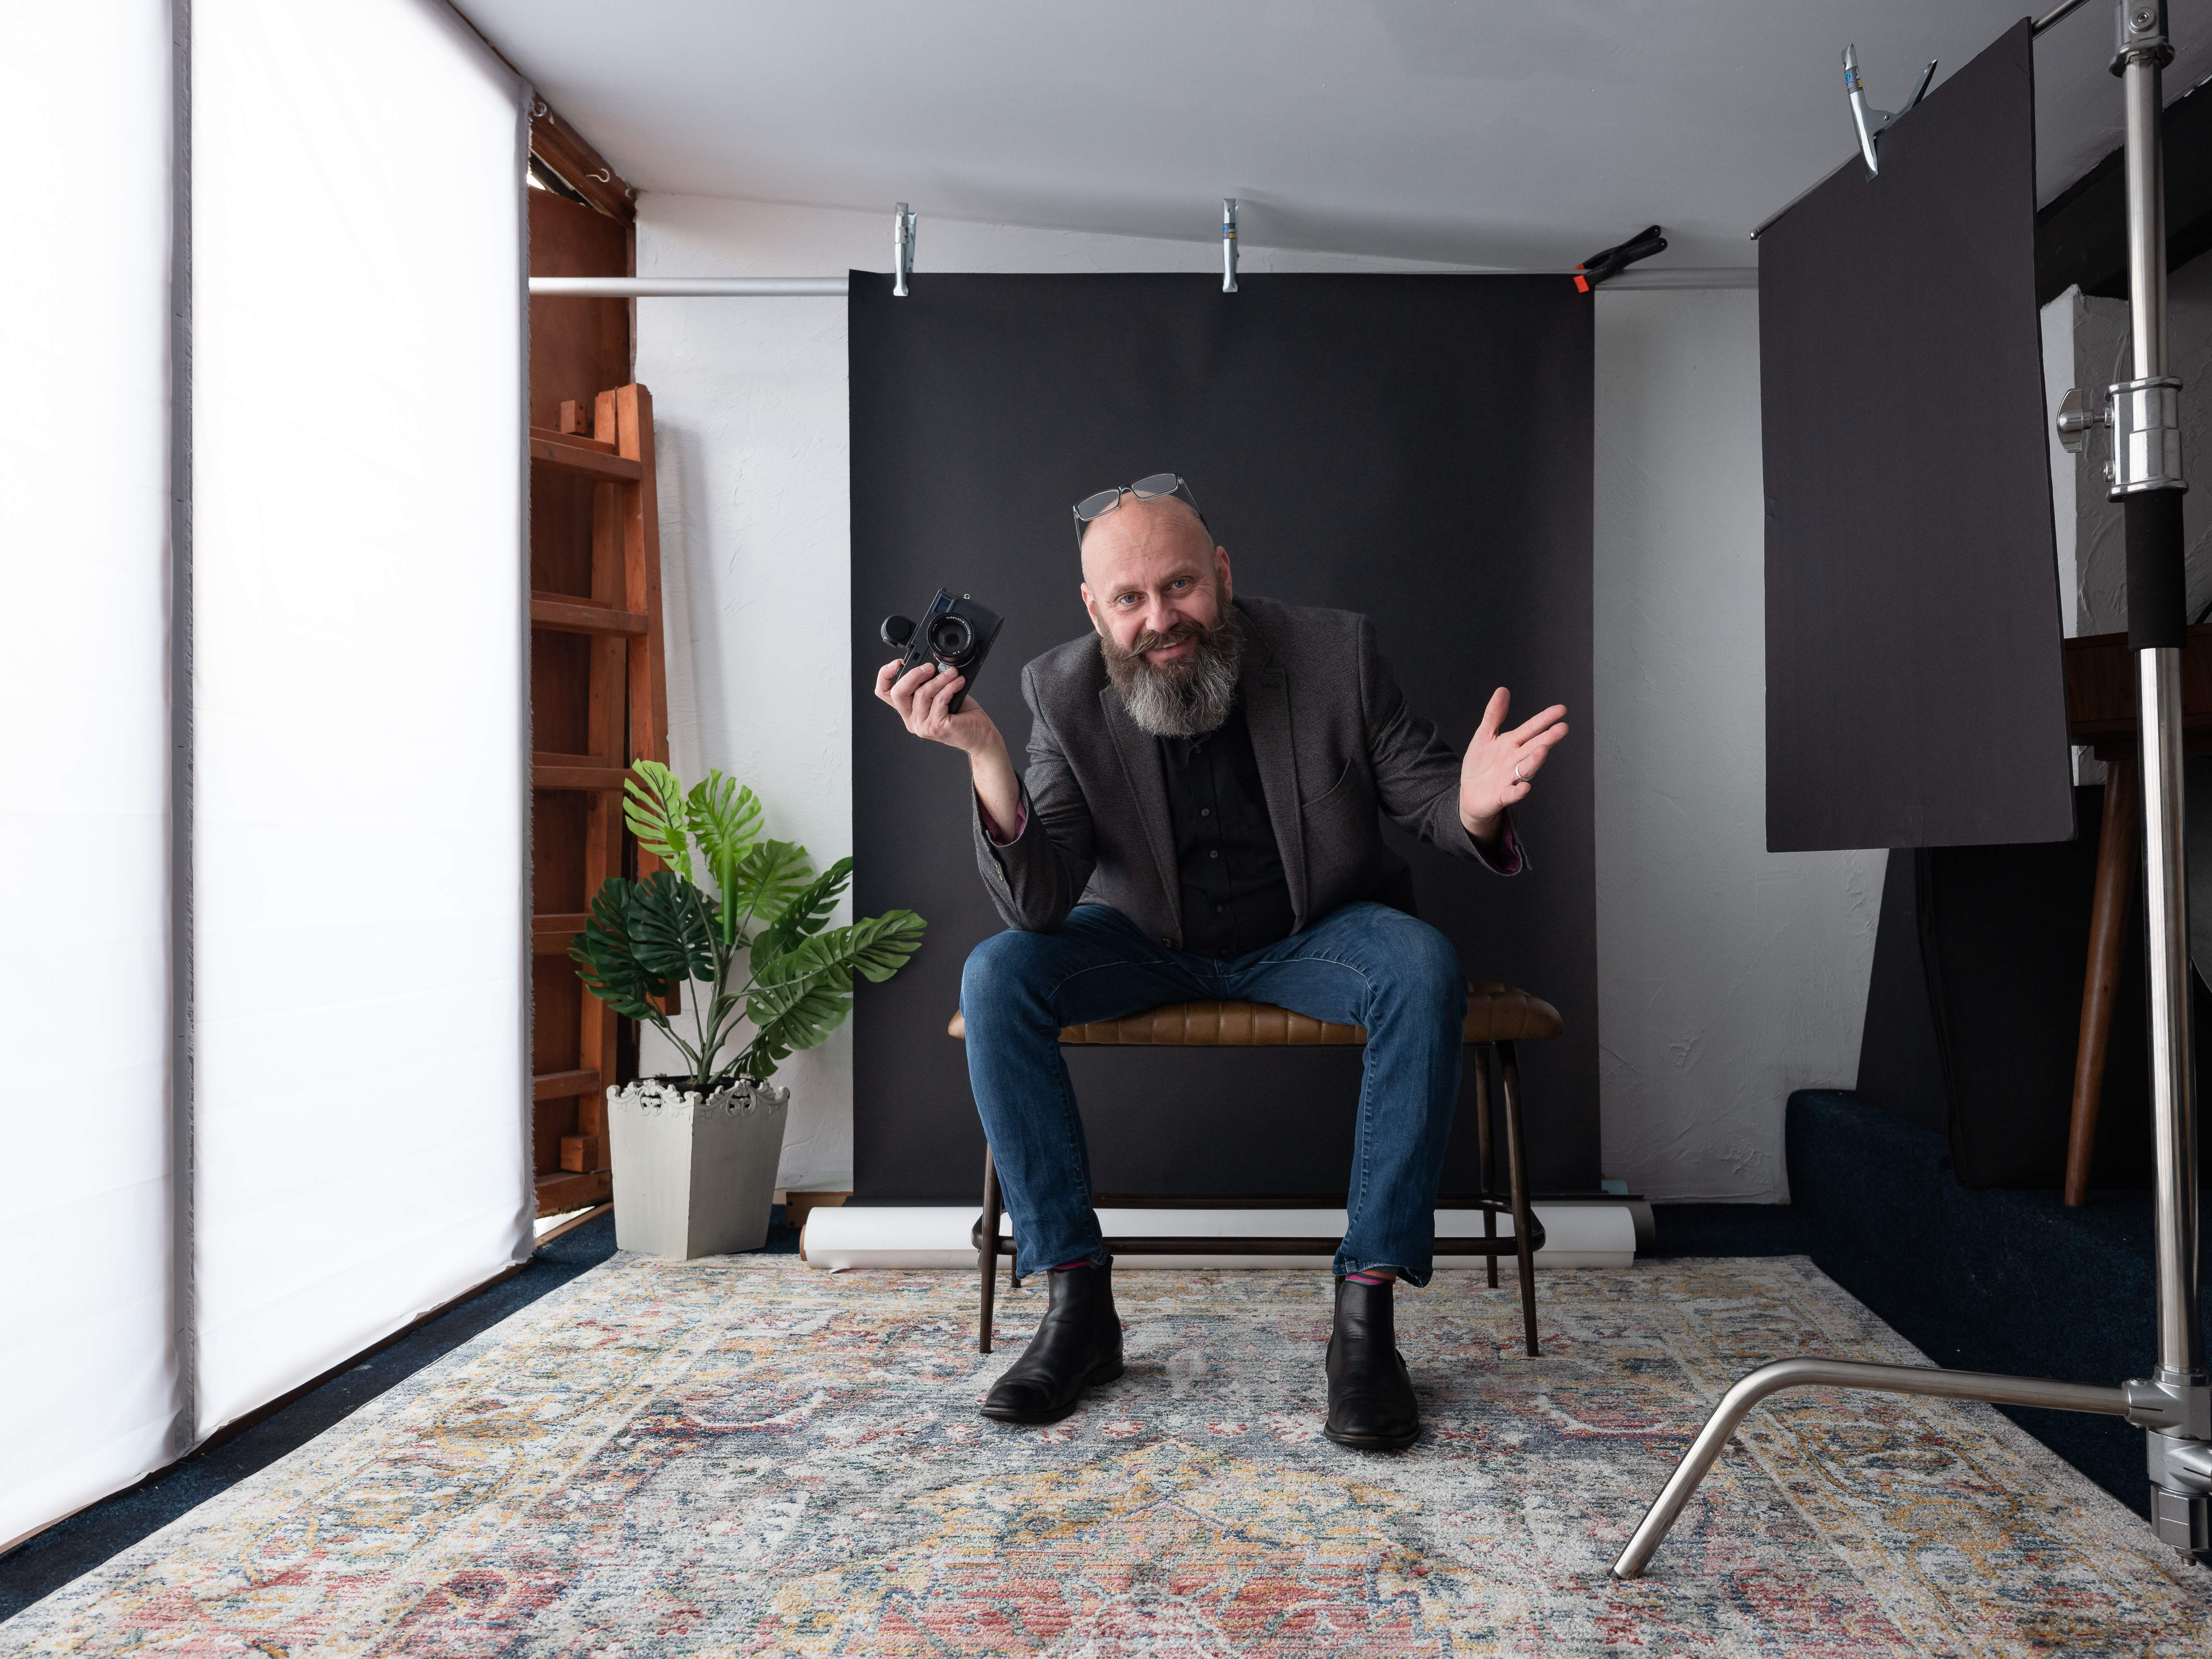 Second studio space for popular photographer